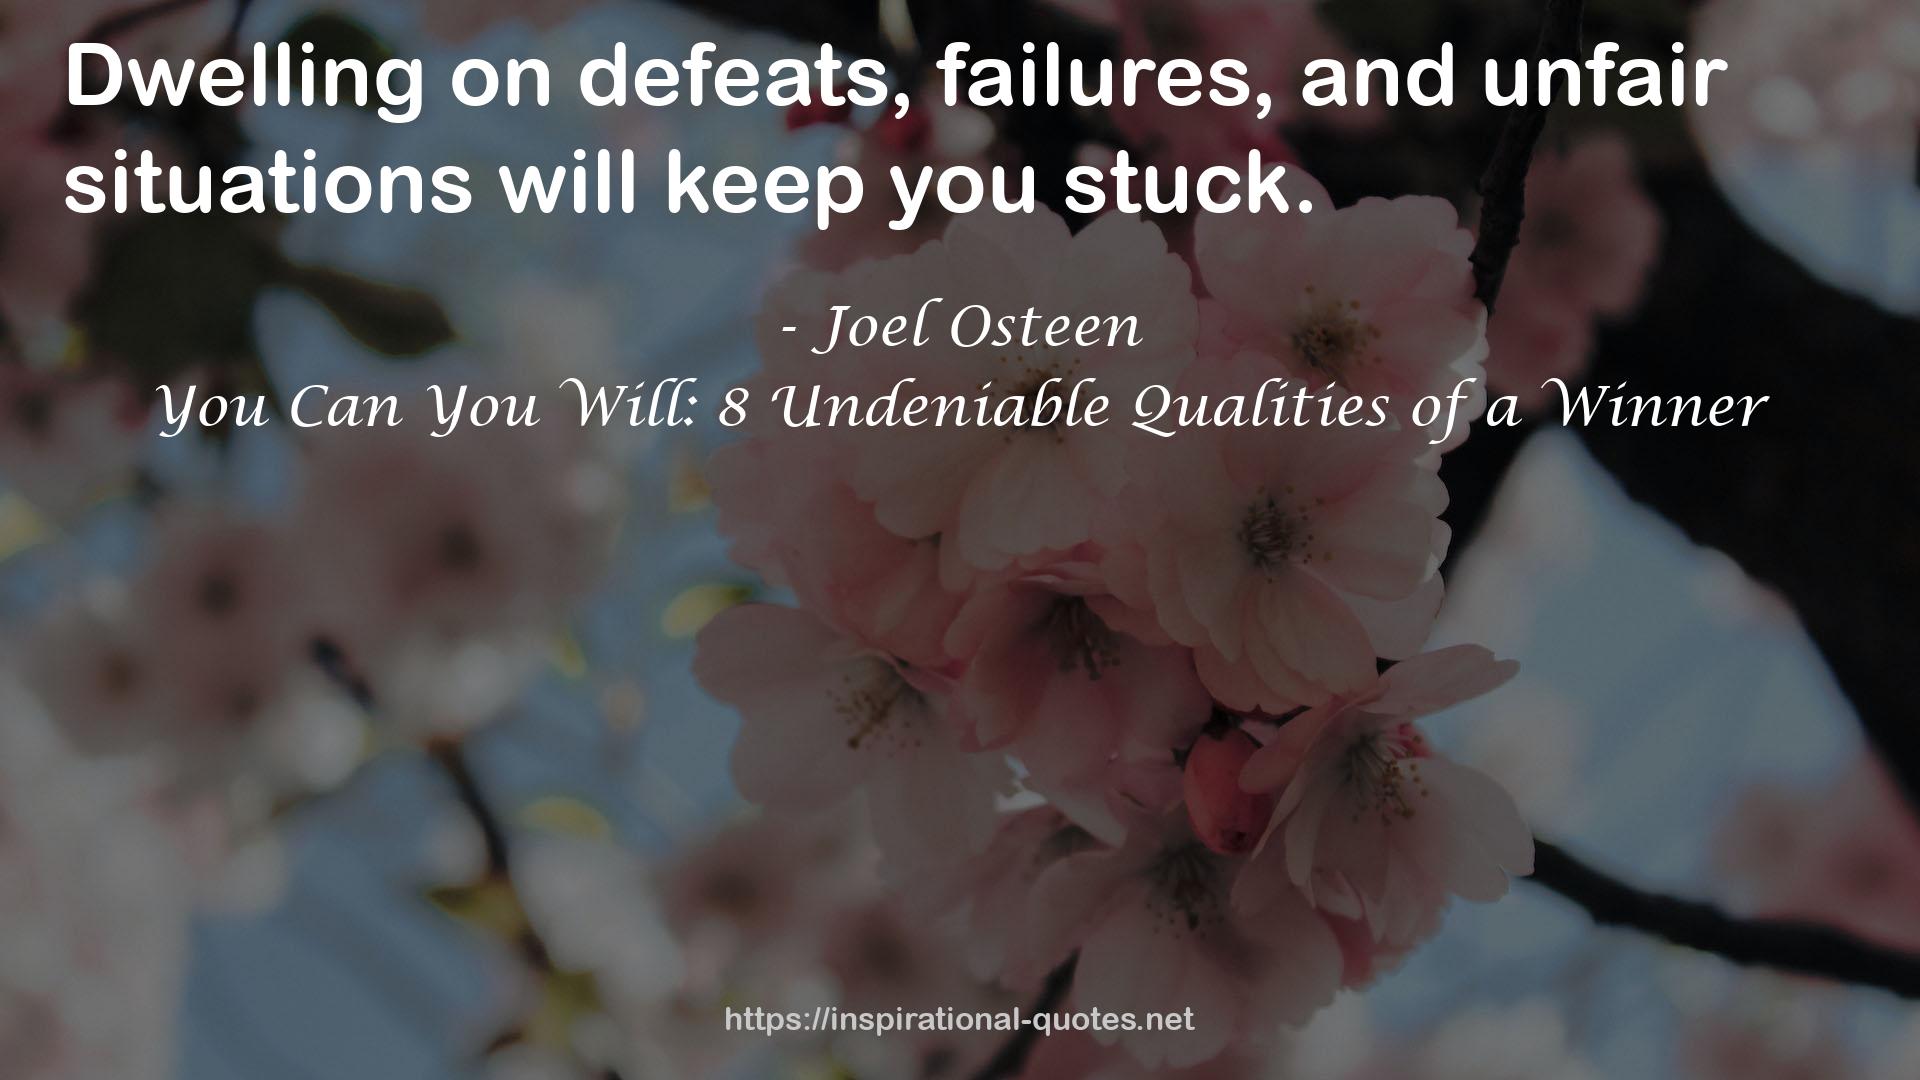 You Can You Will: 8 Undeniable Qualities of a Winner QUOTES